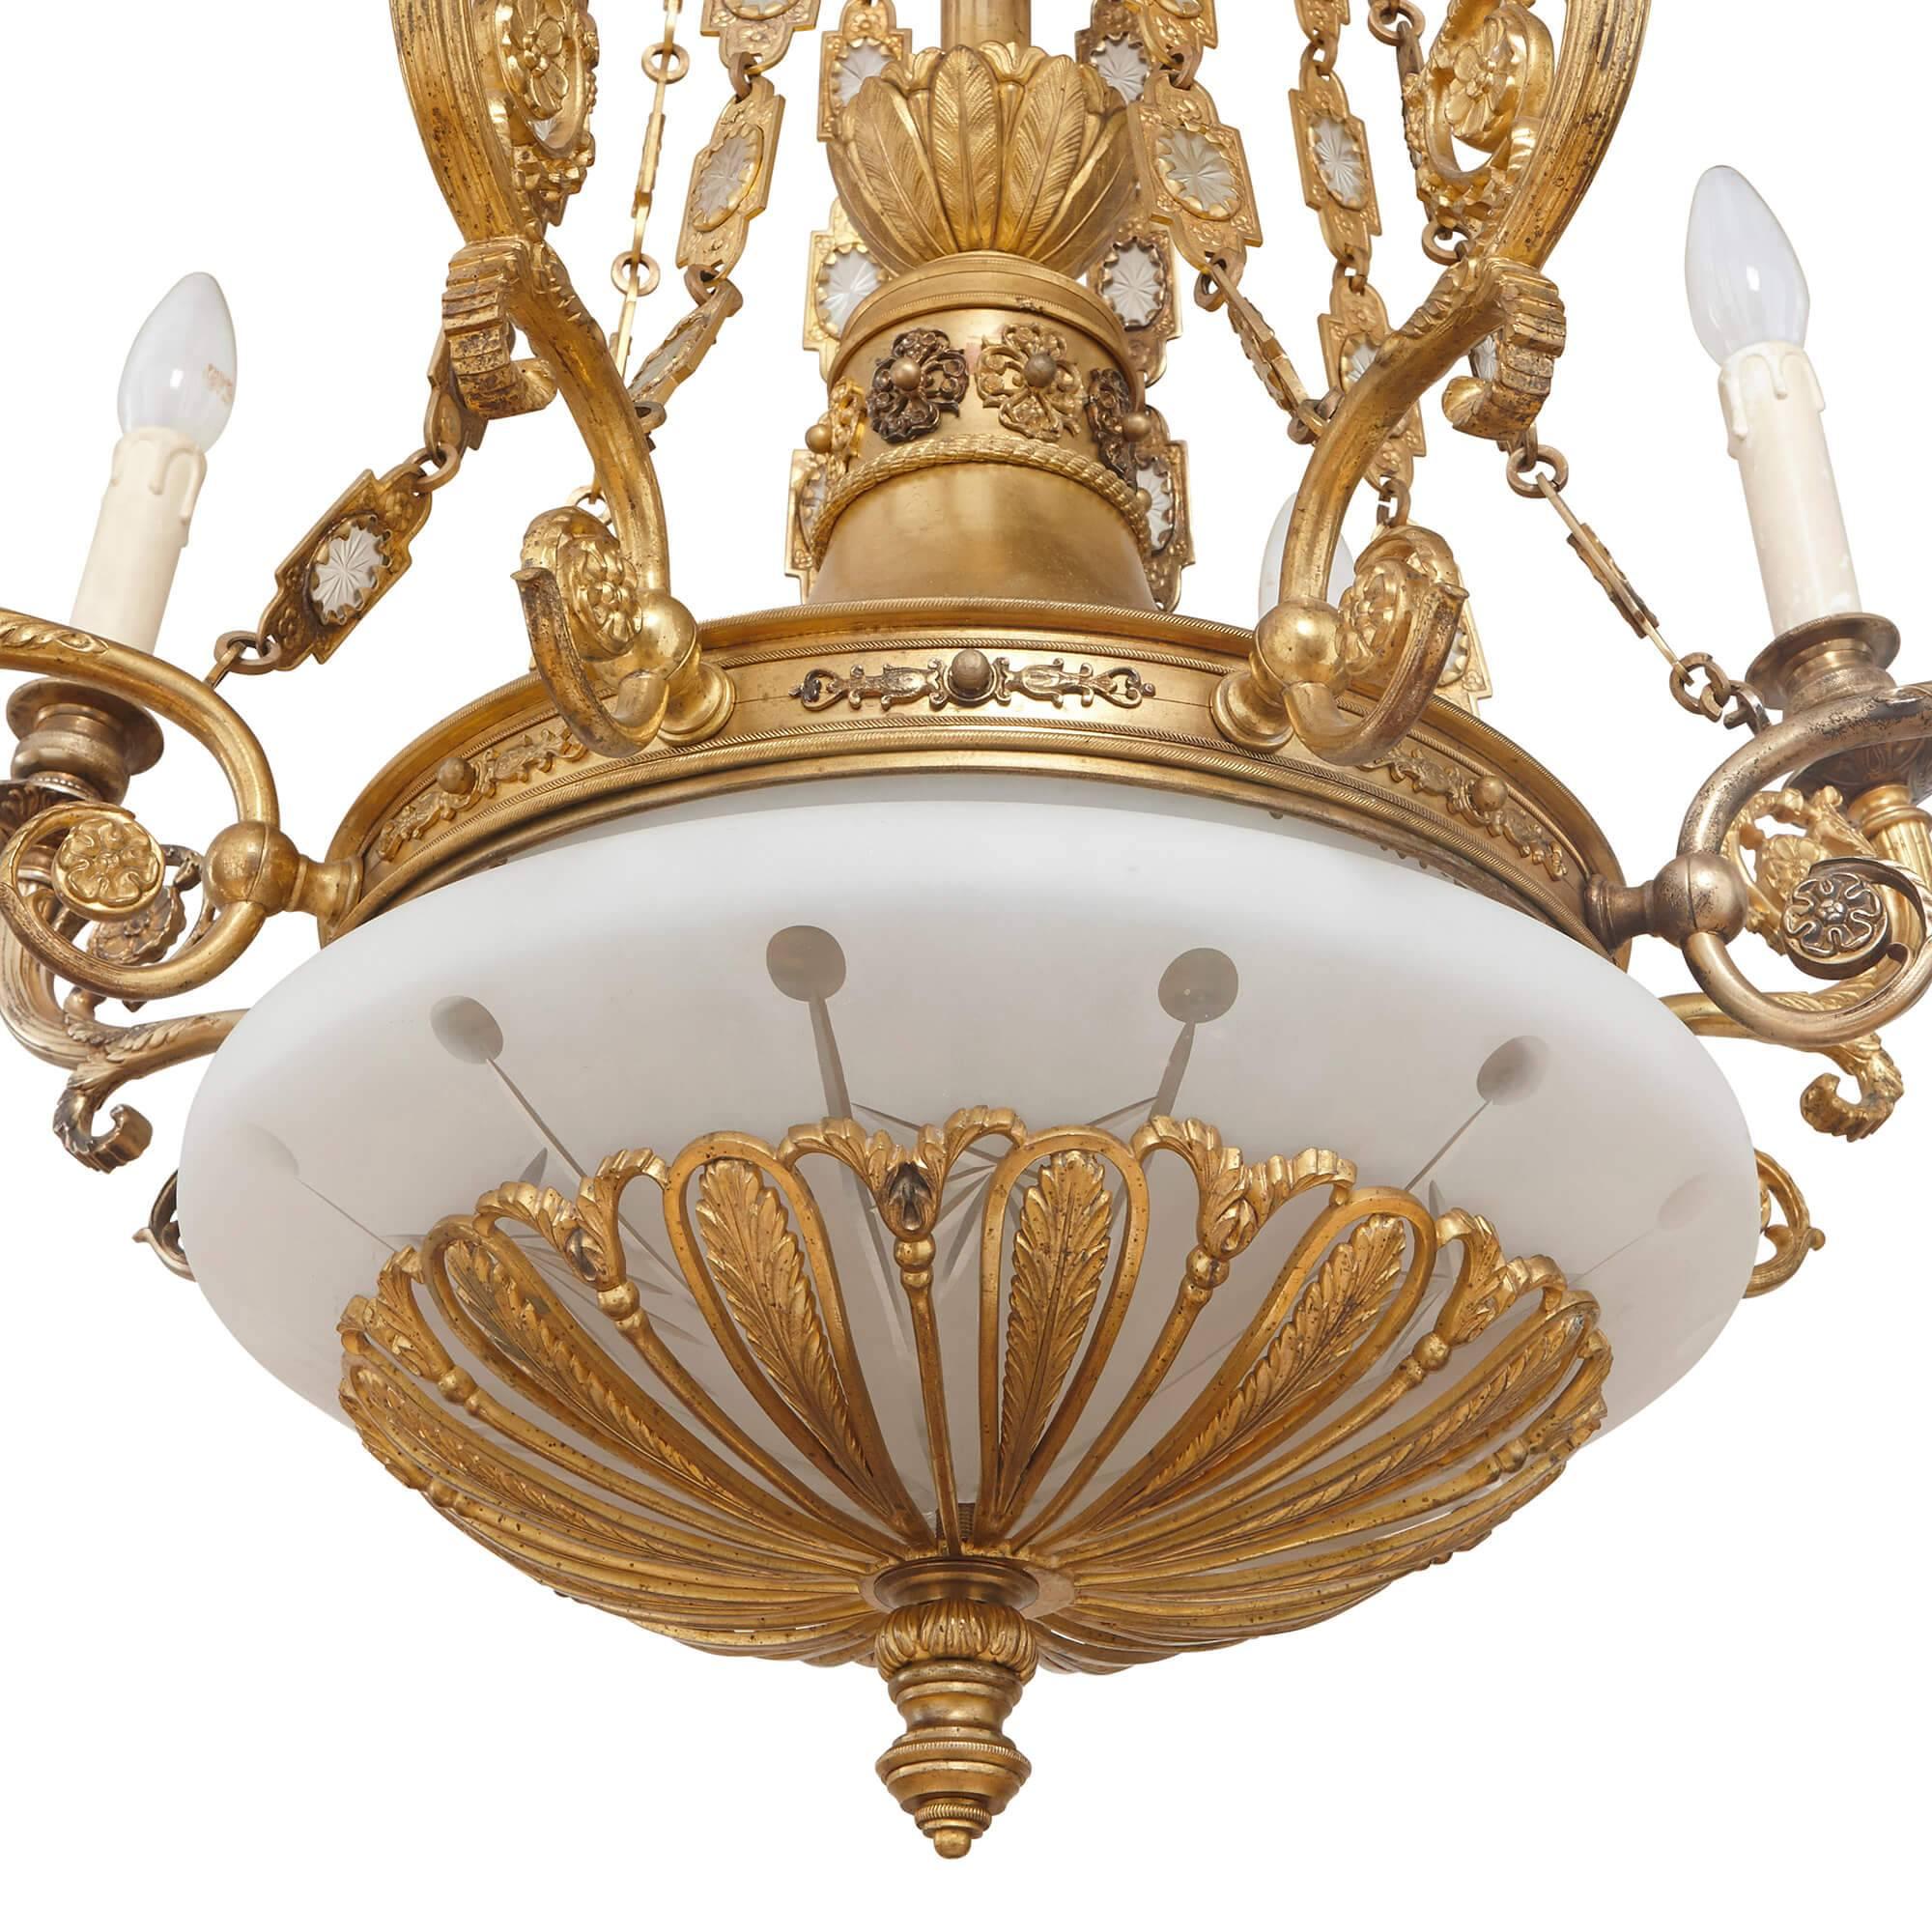 This beautiful, tall chandelier is ideal for a grand entrance hall or room where it can be seen and admired. It is an exceptional piece of Empire style design, perfectly combining glass and gilt bronze, with a sumptuous simplicity and